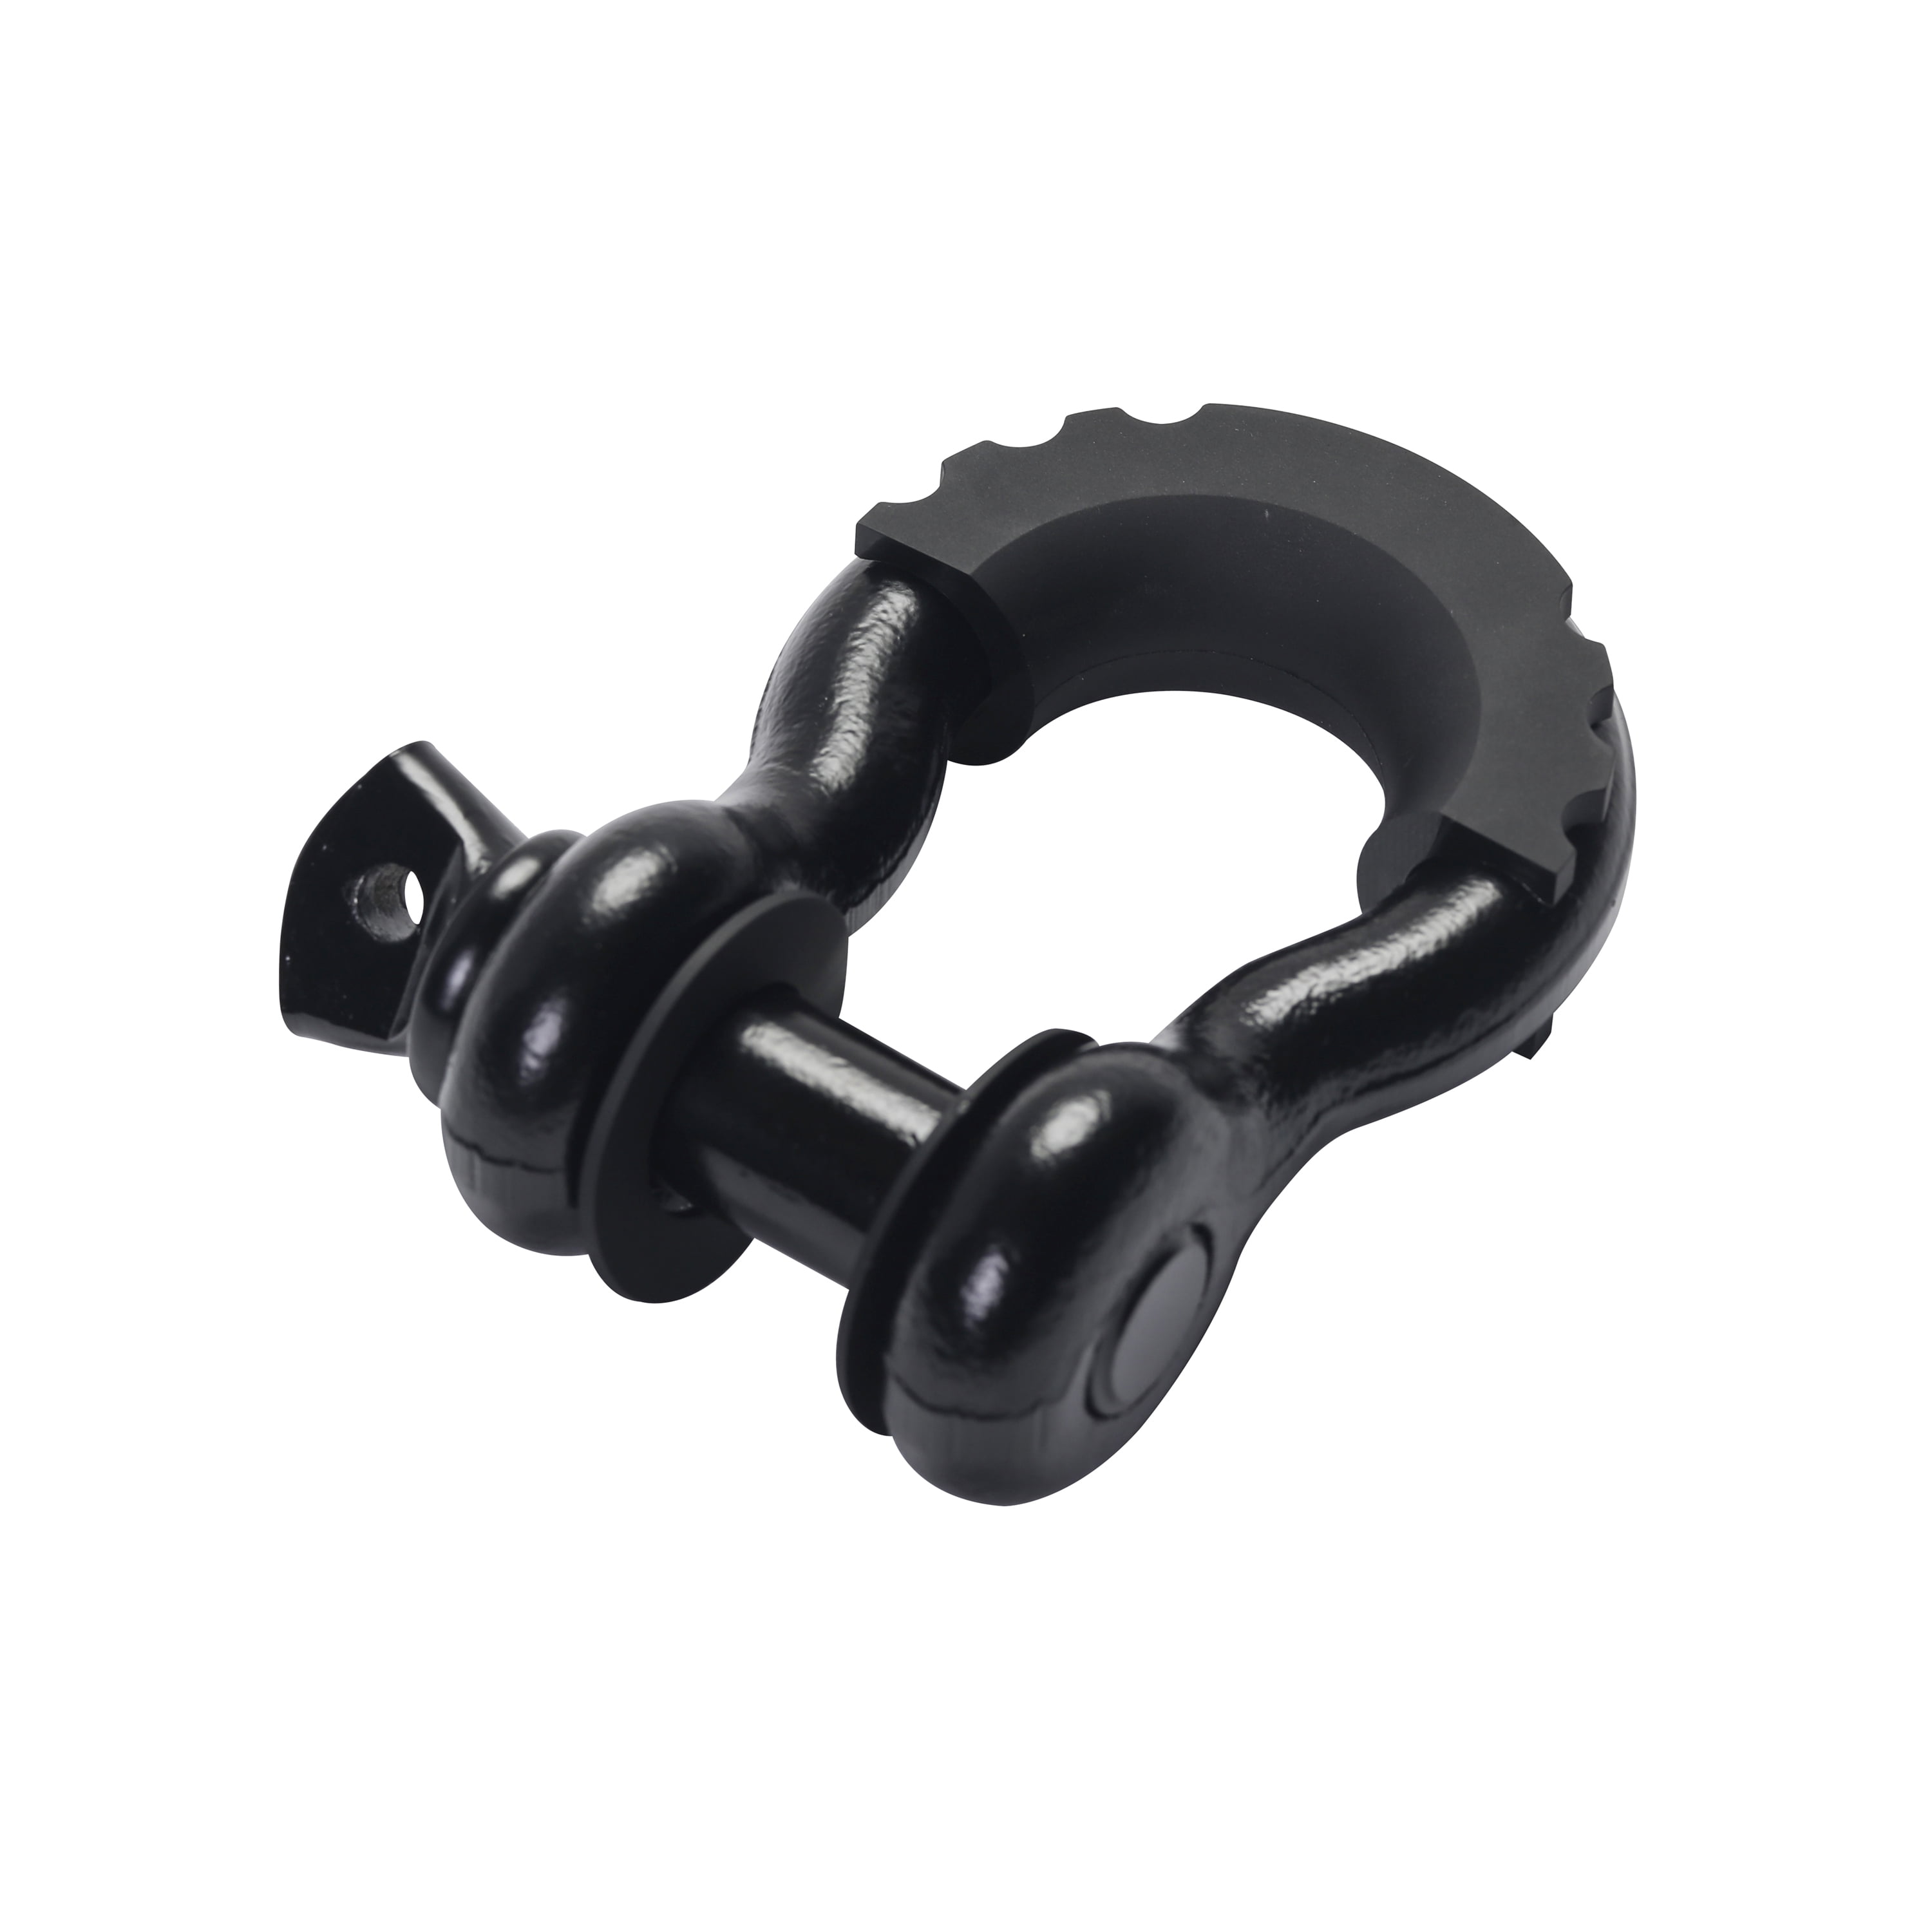 Hyper Tough 3/4-inch D-Ring Shackle 10,000LBS Heavy-Duty Drop-Forged Steel 10800618